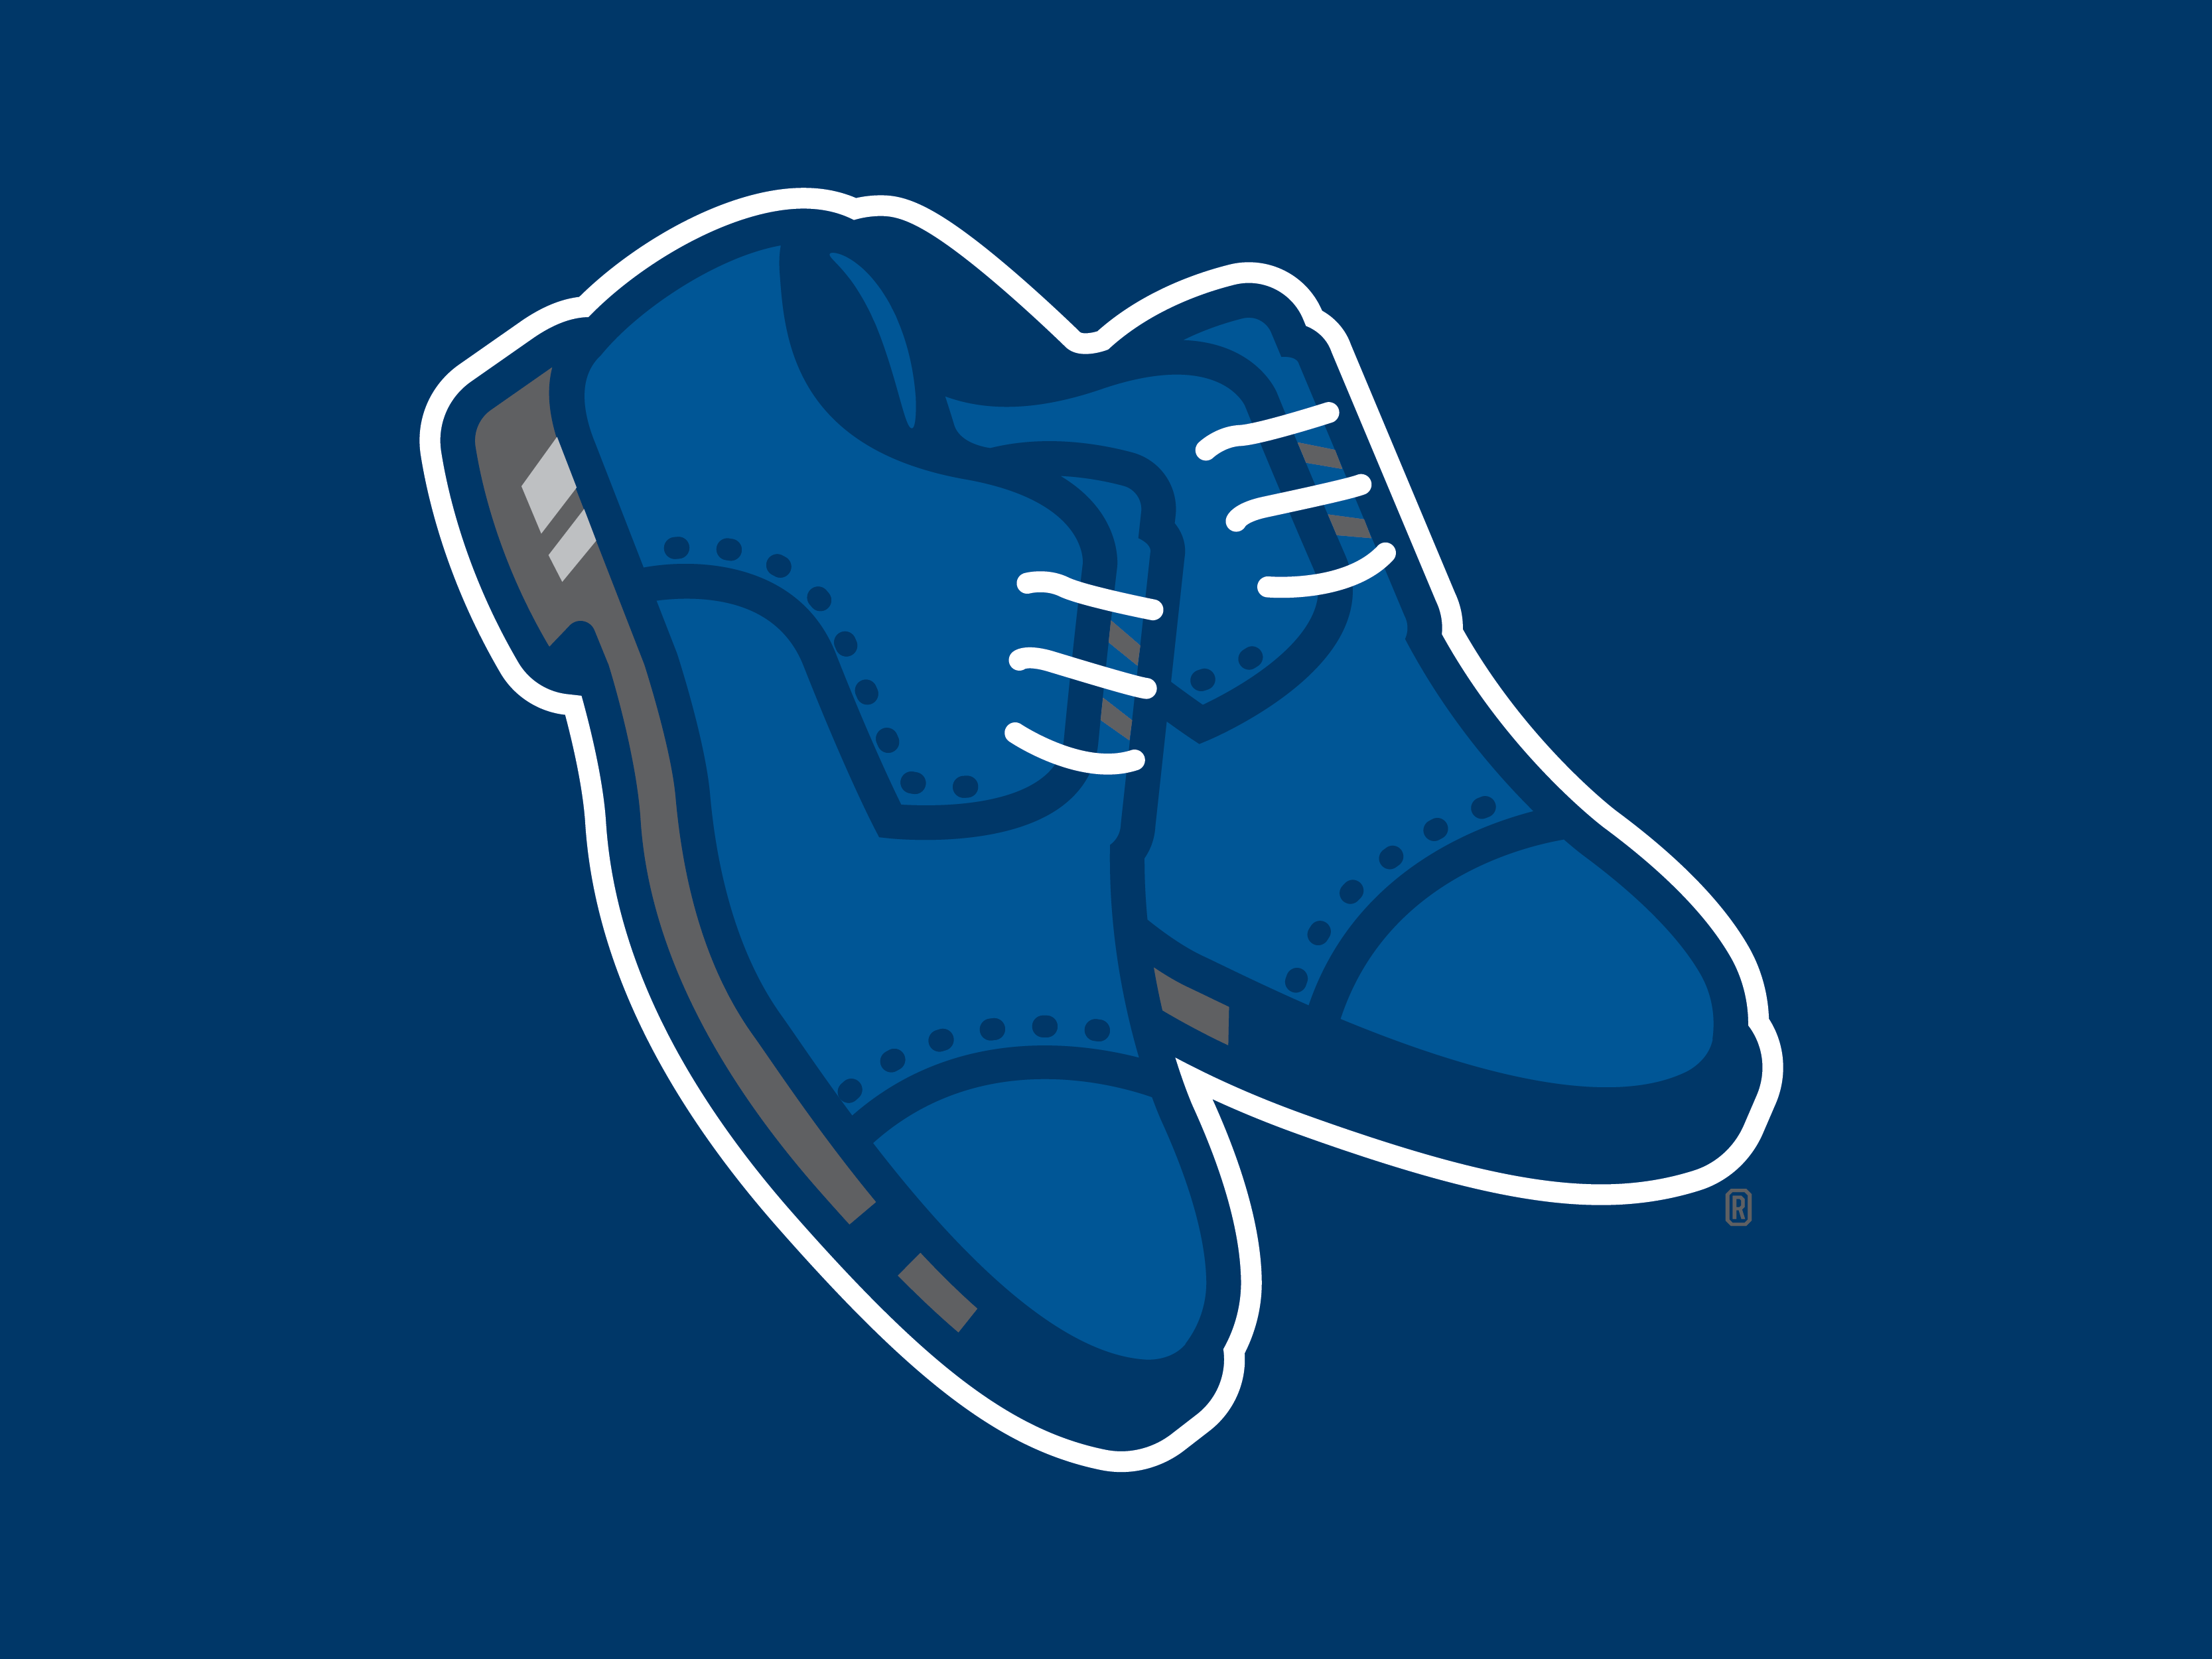 Blue Suede Shoes by Ryan Foose on Dribbble